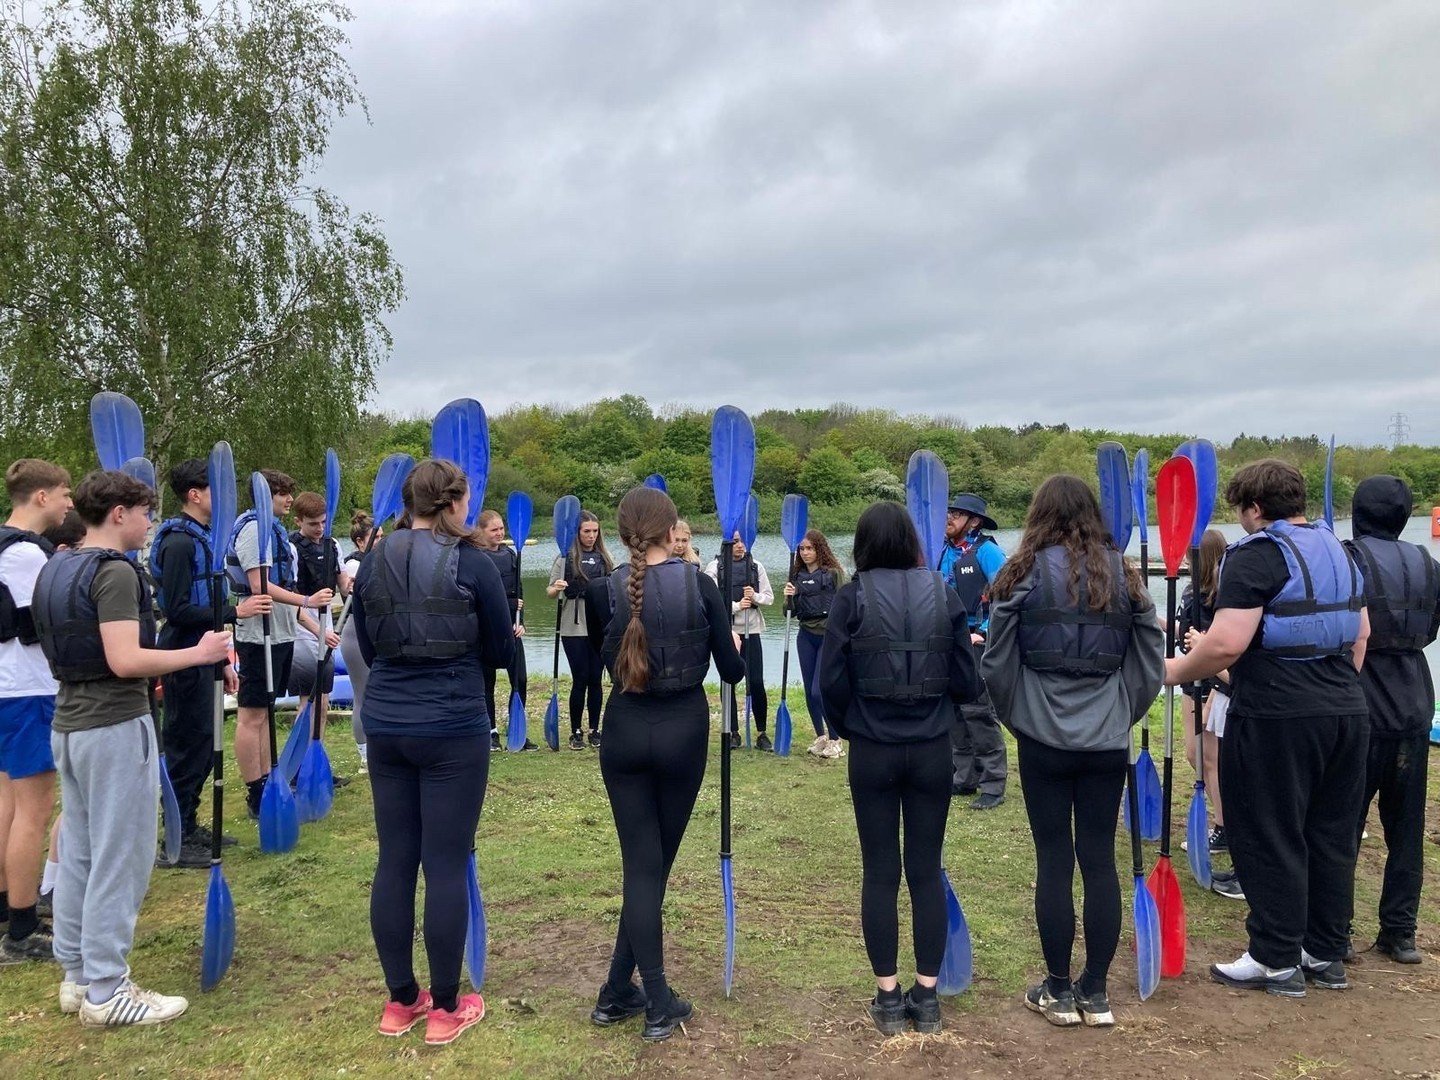 This year&rsquo;s Year 11 Revision Bootcamp has been a great success. Day 2 consisted of some early morning Maths revision with Mr Simpson, kayaking, paddle boarding, a treasure hunt, Science Connect 4 and so many exam questions answered! 

Thank you